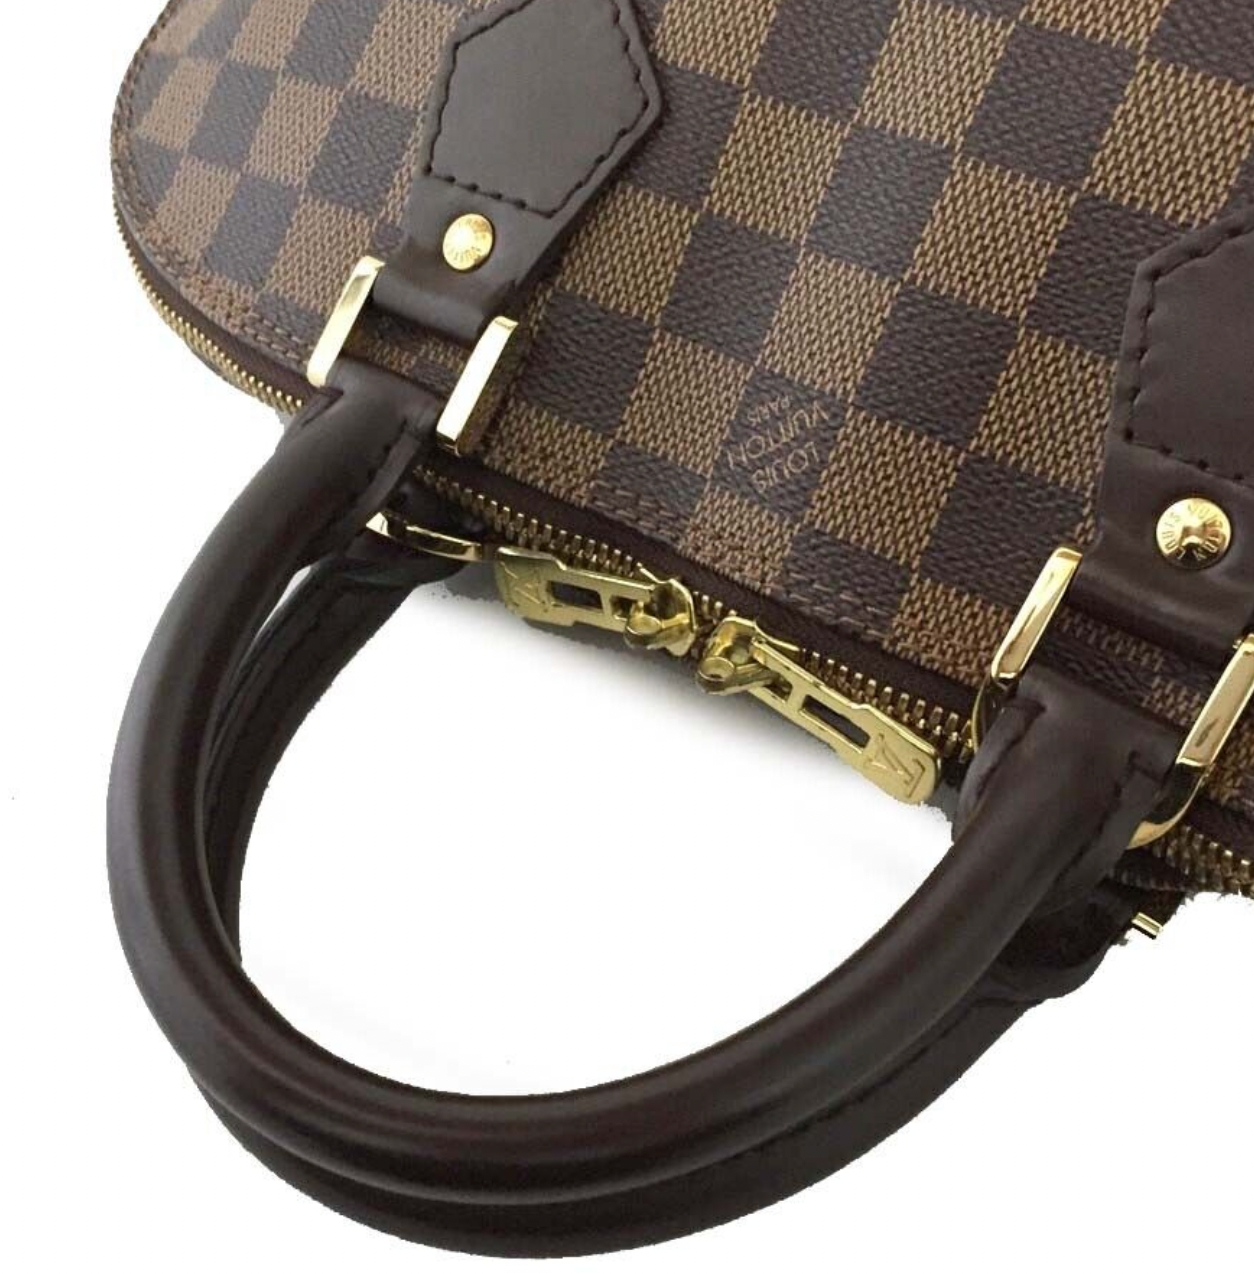 LOUIS VUITTON PM Bag – Imperial Jewellery